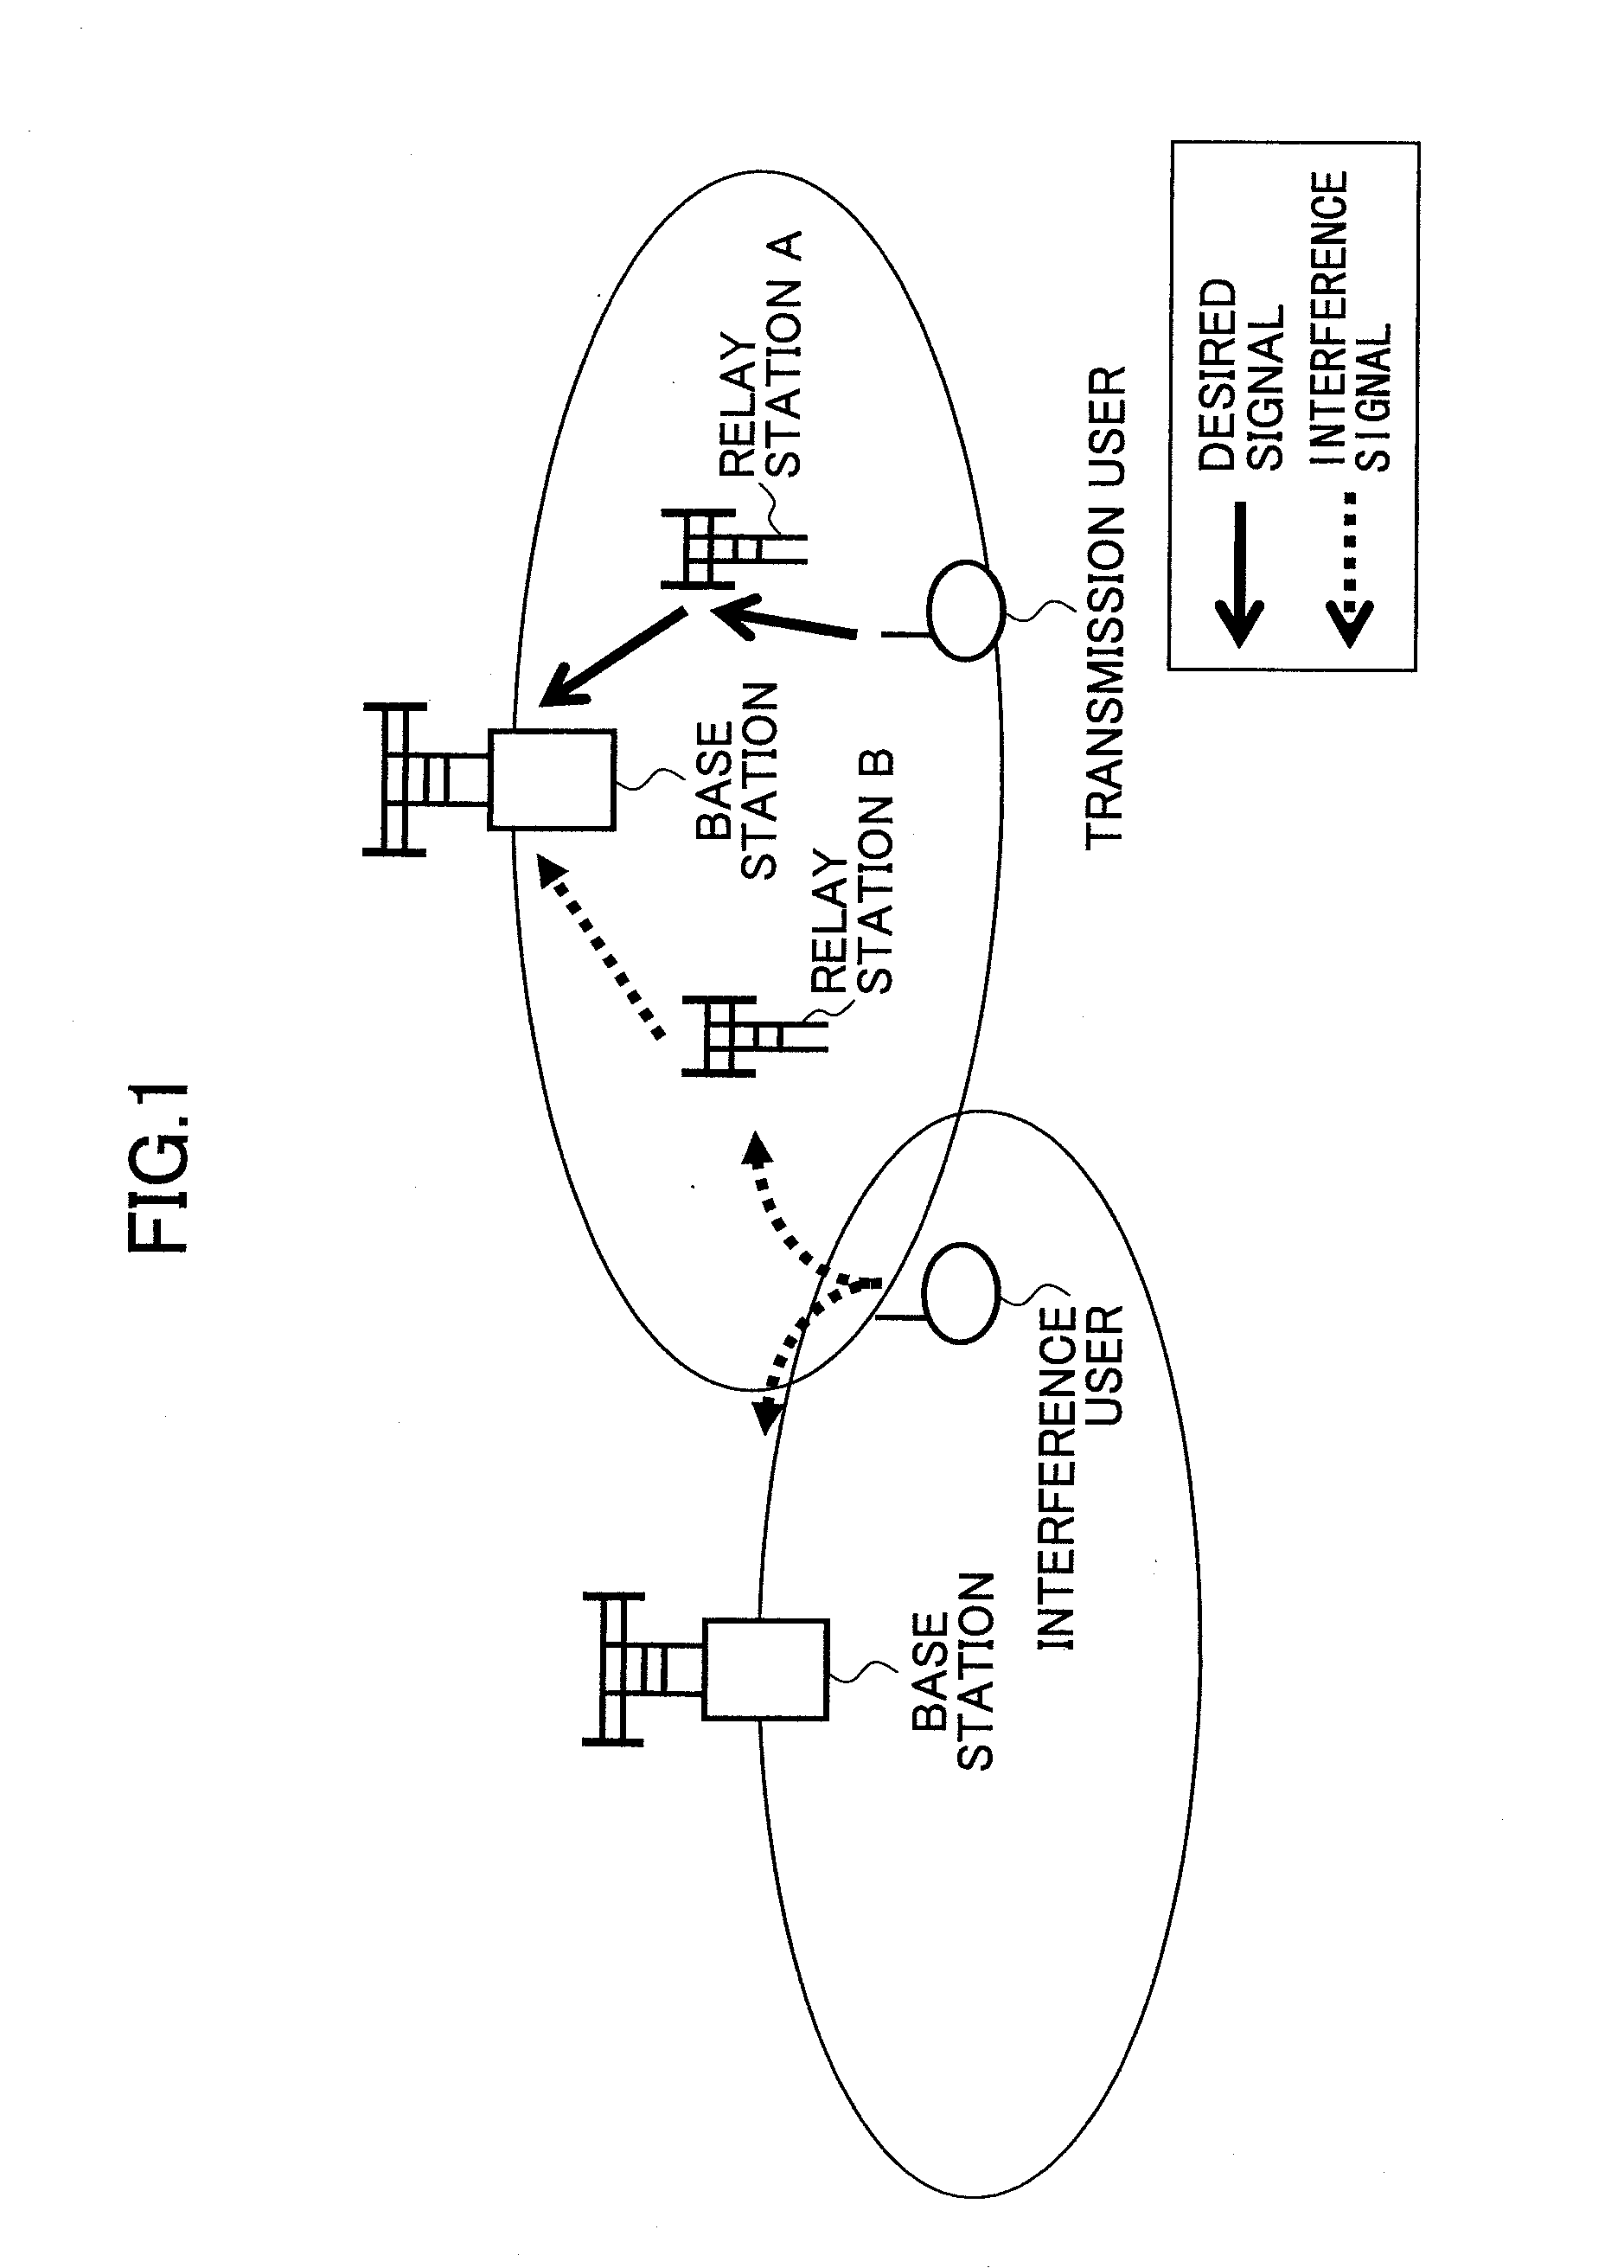 Relay transmission system, base station, relay station, and method